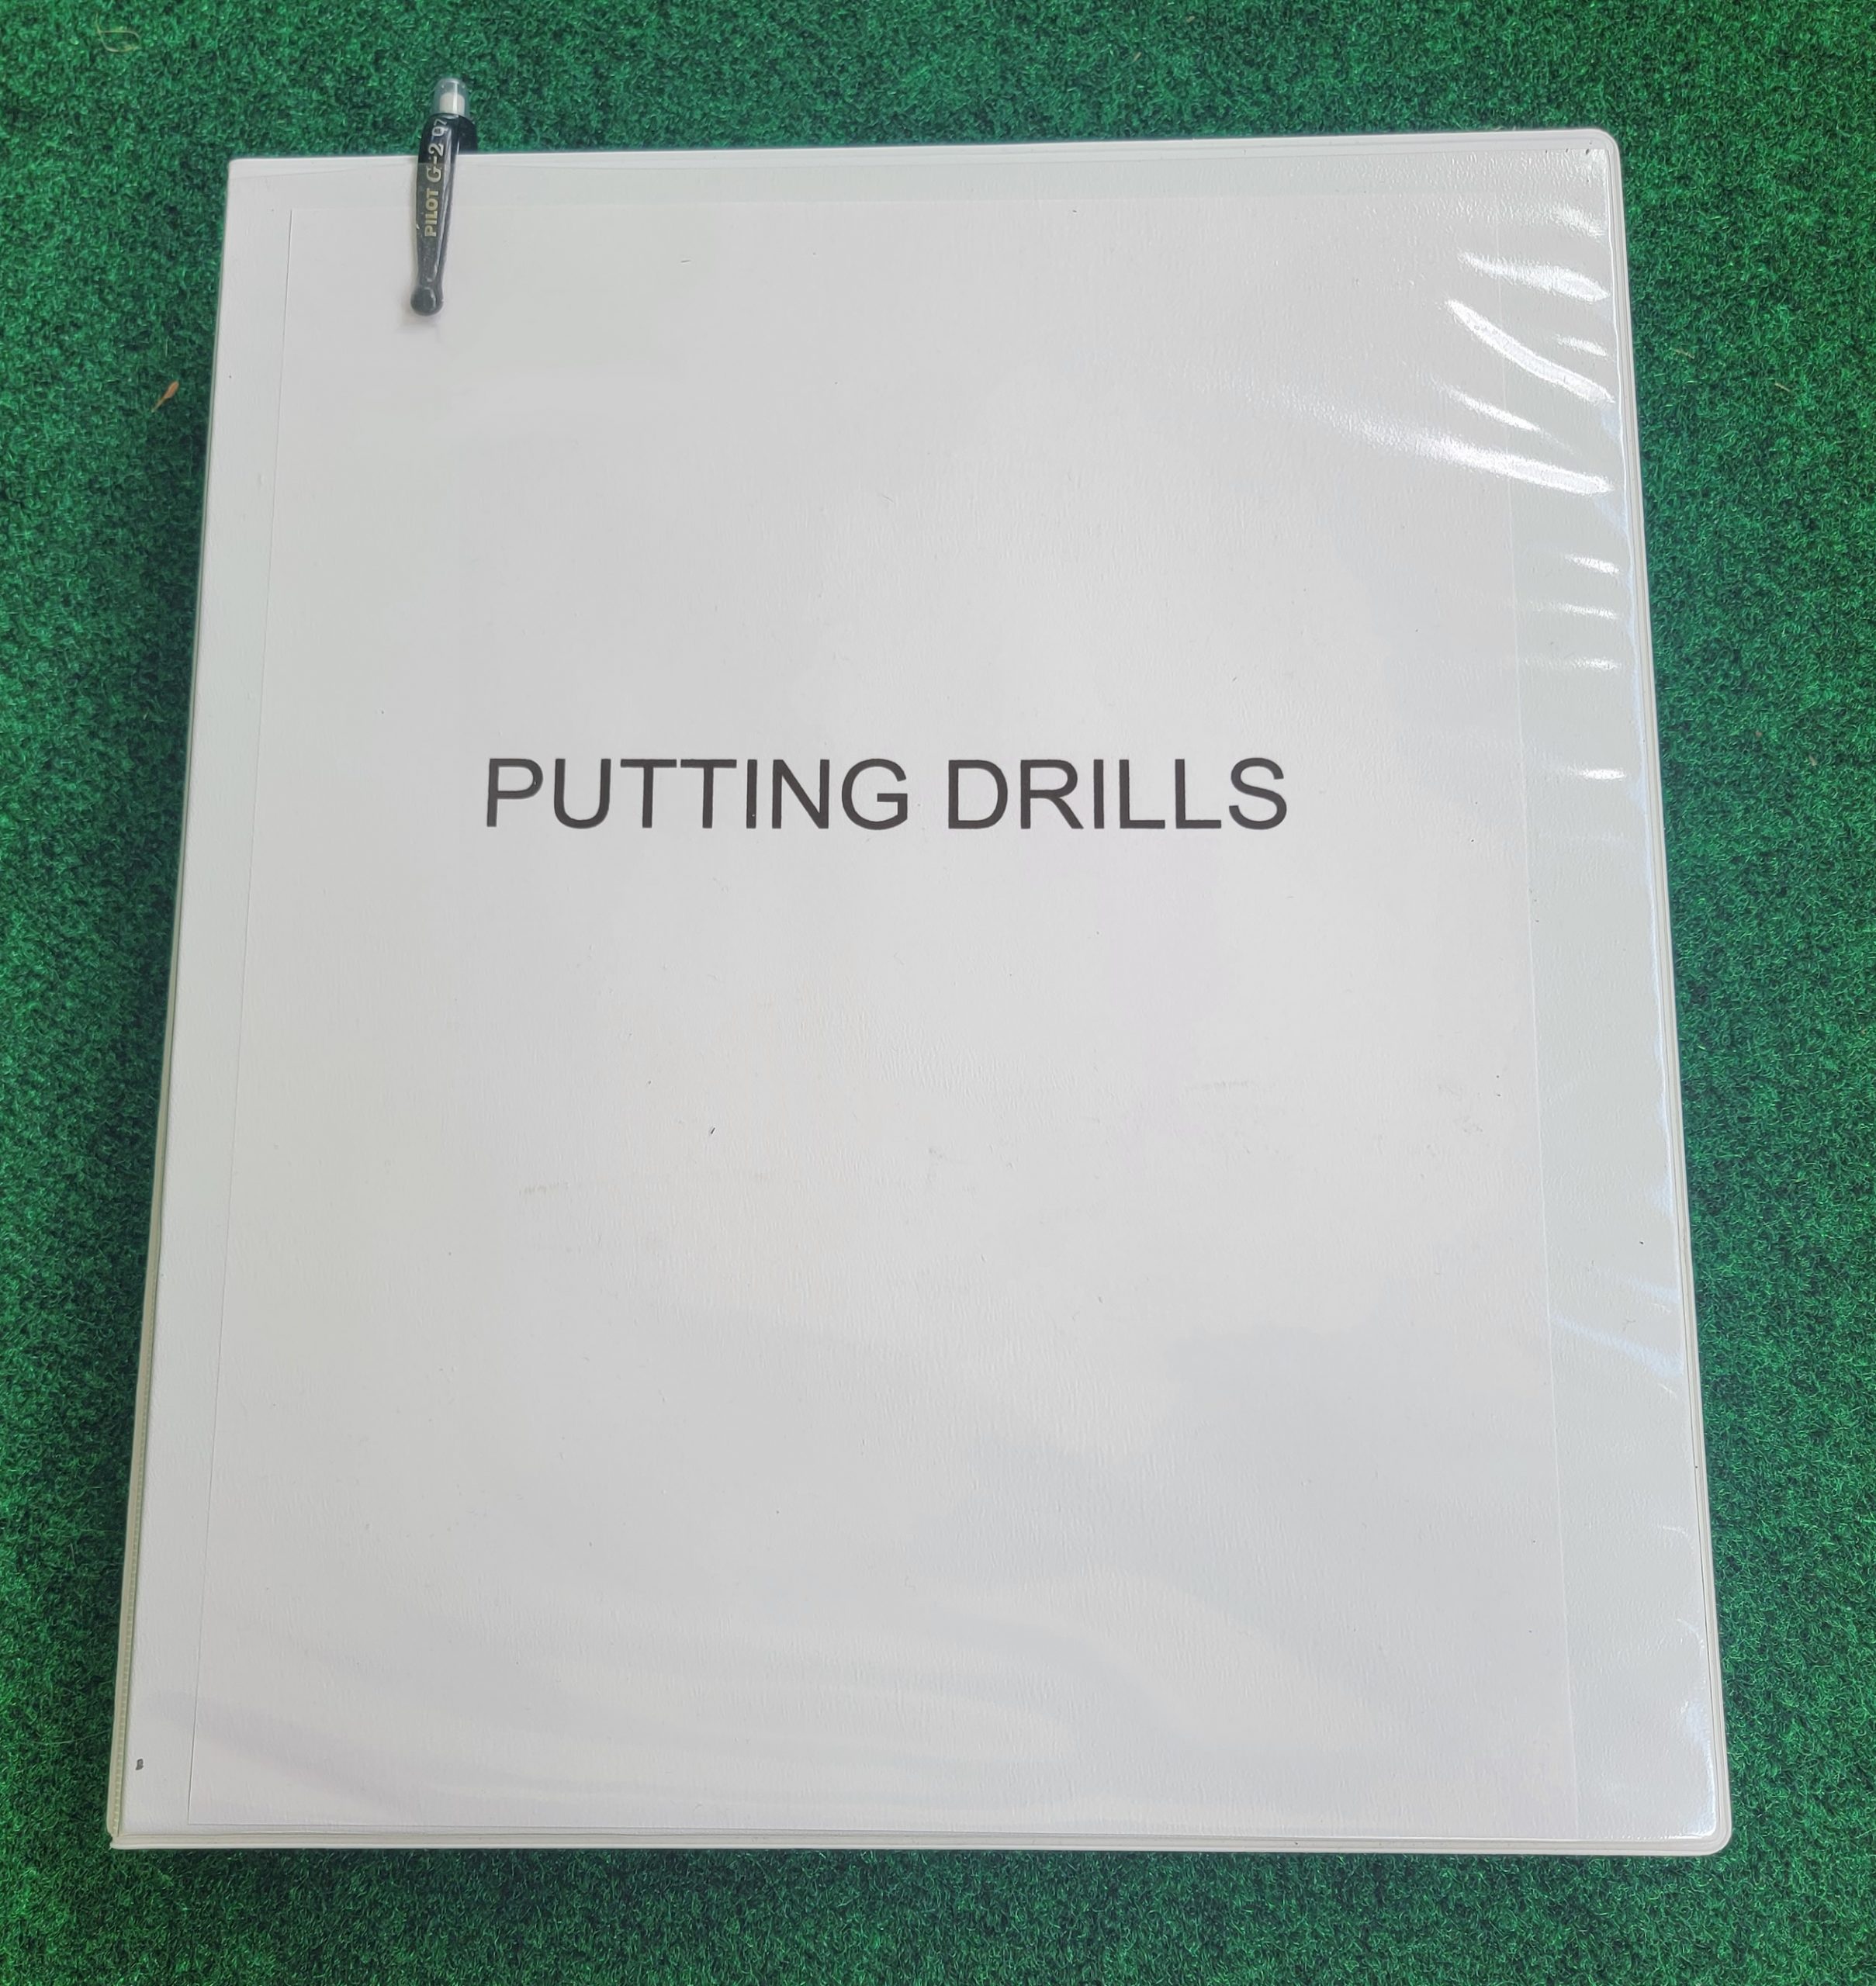 Old Duffer Golf image of a putting drills book in addition to practice bags